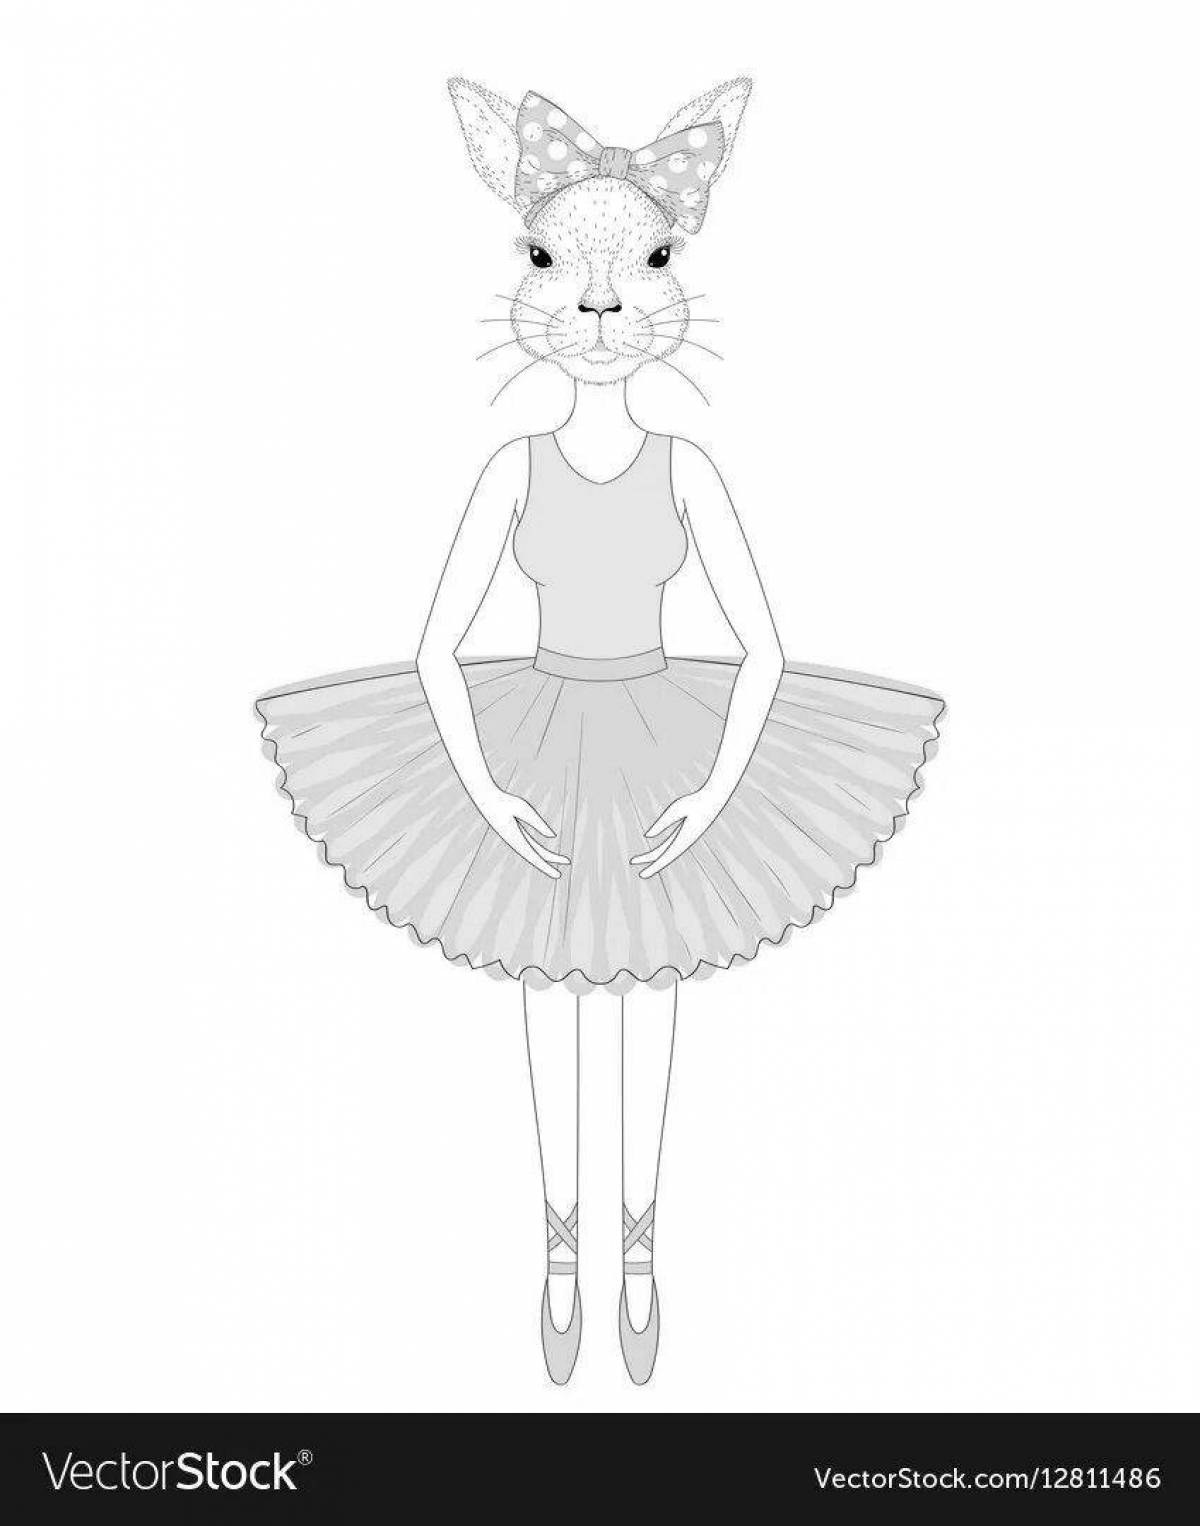 Coloring page blissful cat ballerina